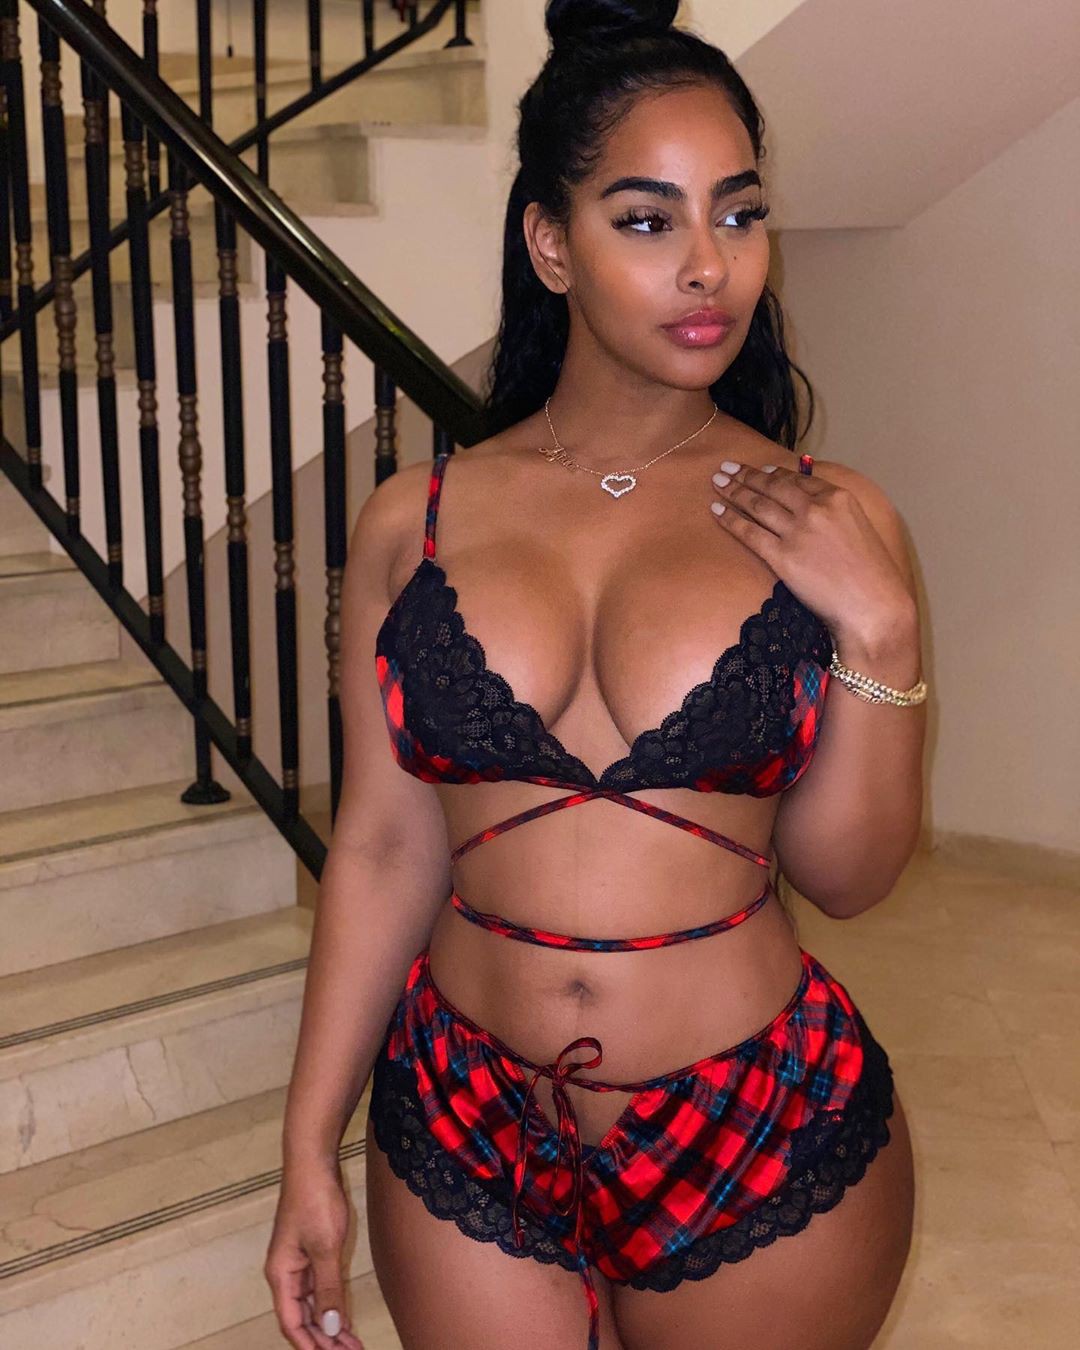 Ayisha Diaz lingerie top outfits for girls, smooth thigh pics: Lingerie,  Instagram girls,  Undergarment,  Lingerie Top,  Agent Provocateur  